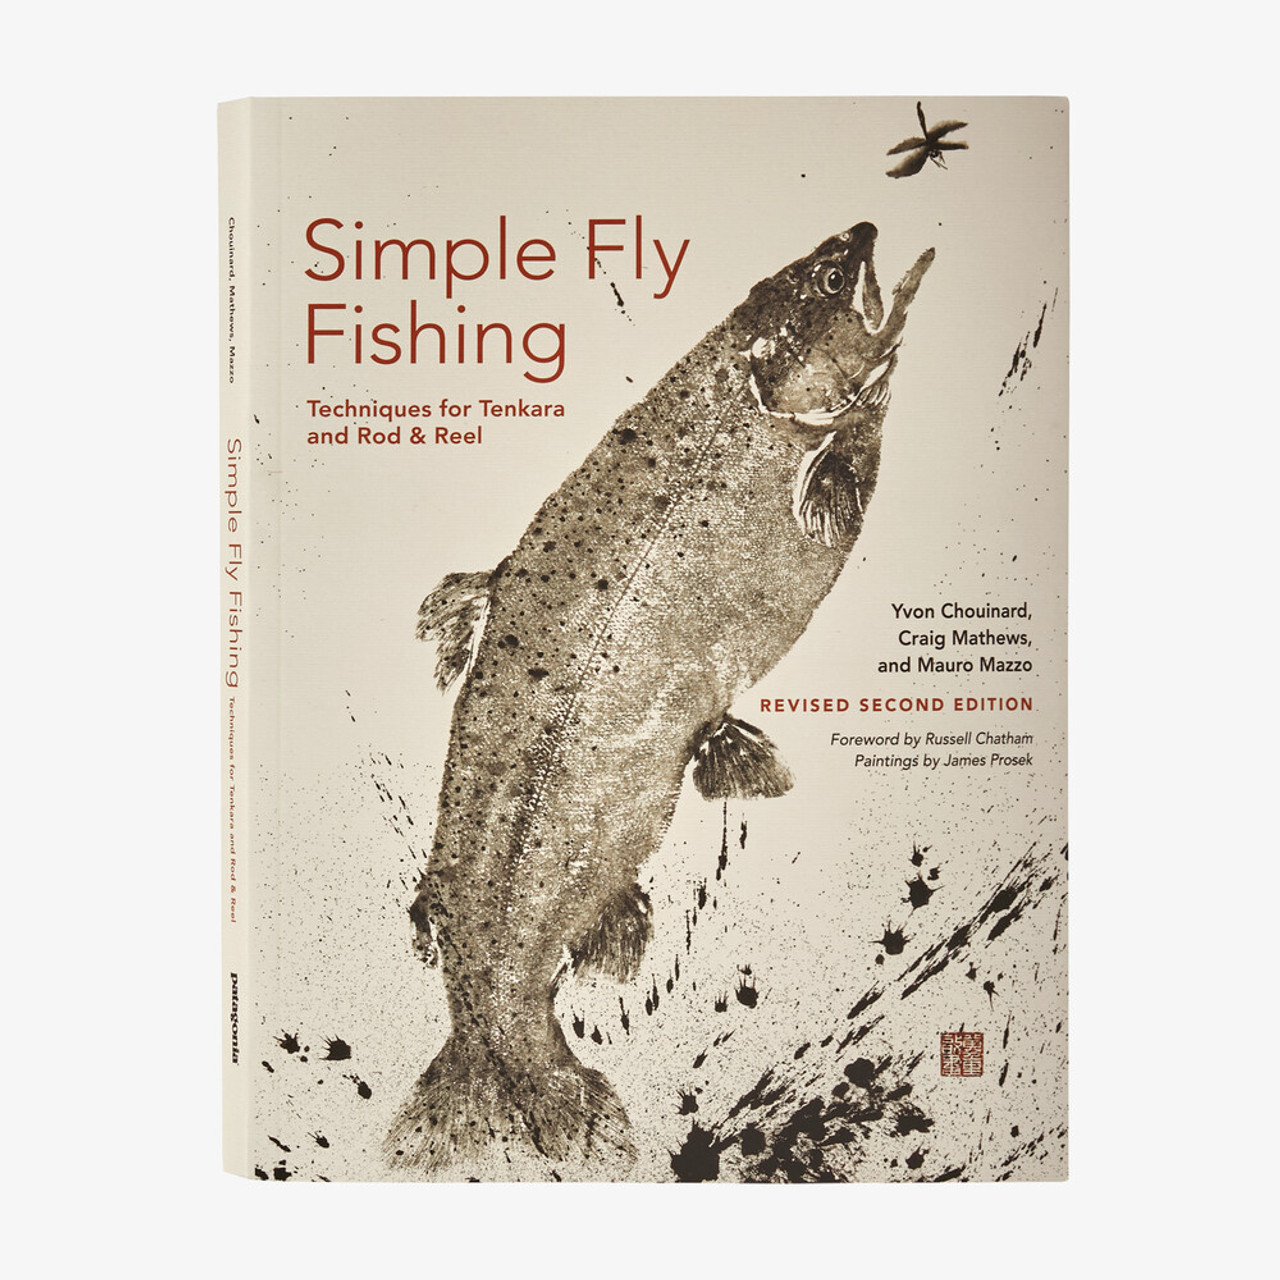 Simple Fly Fishing - The Mountaineer